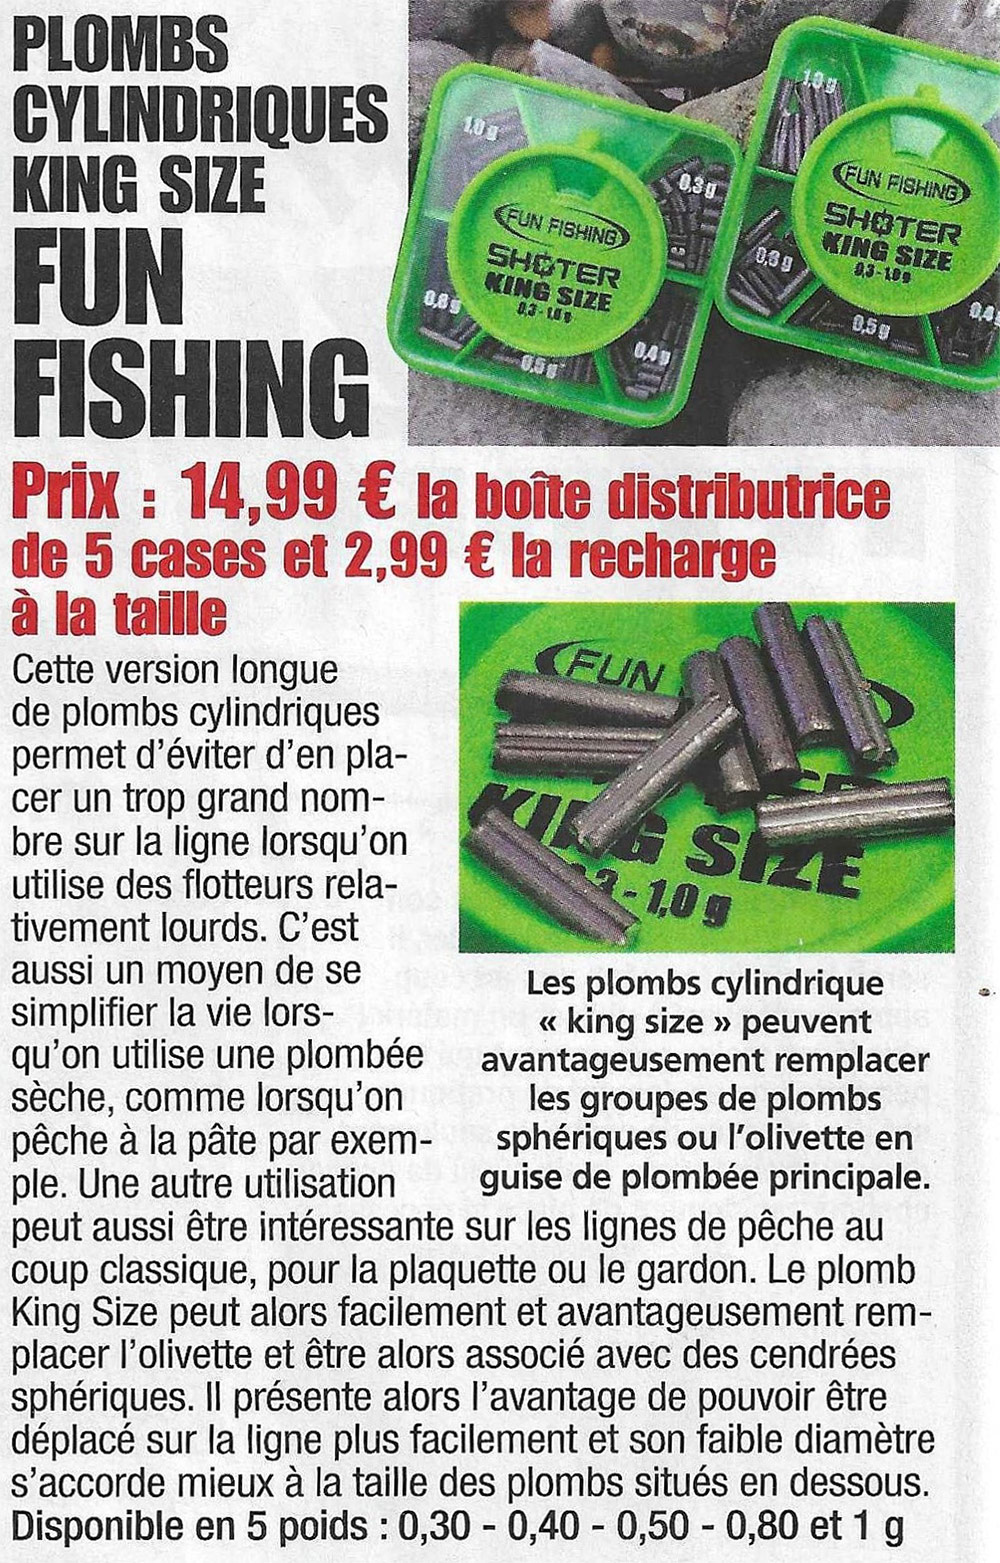 ffishing plombs king size cyl